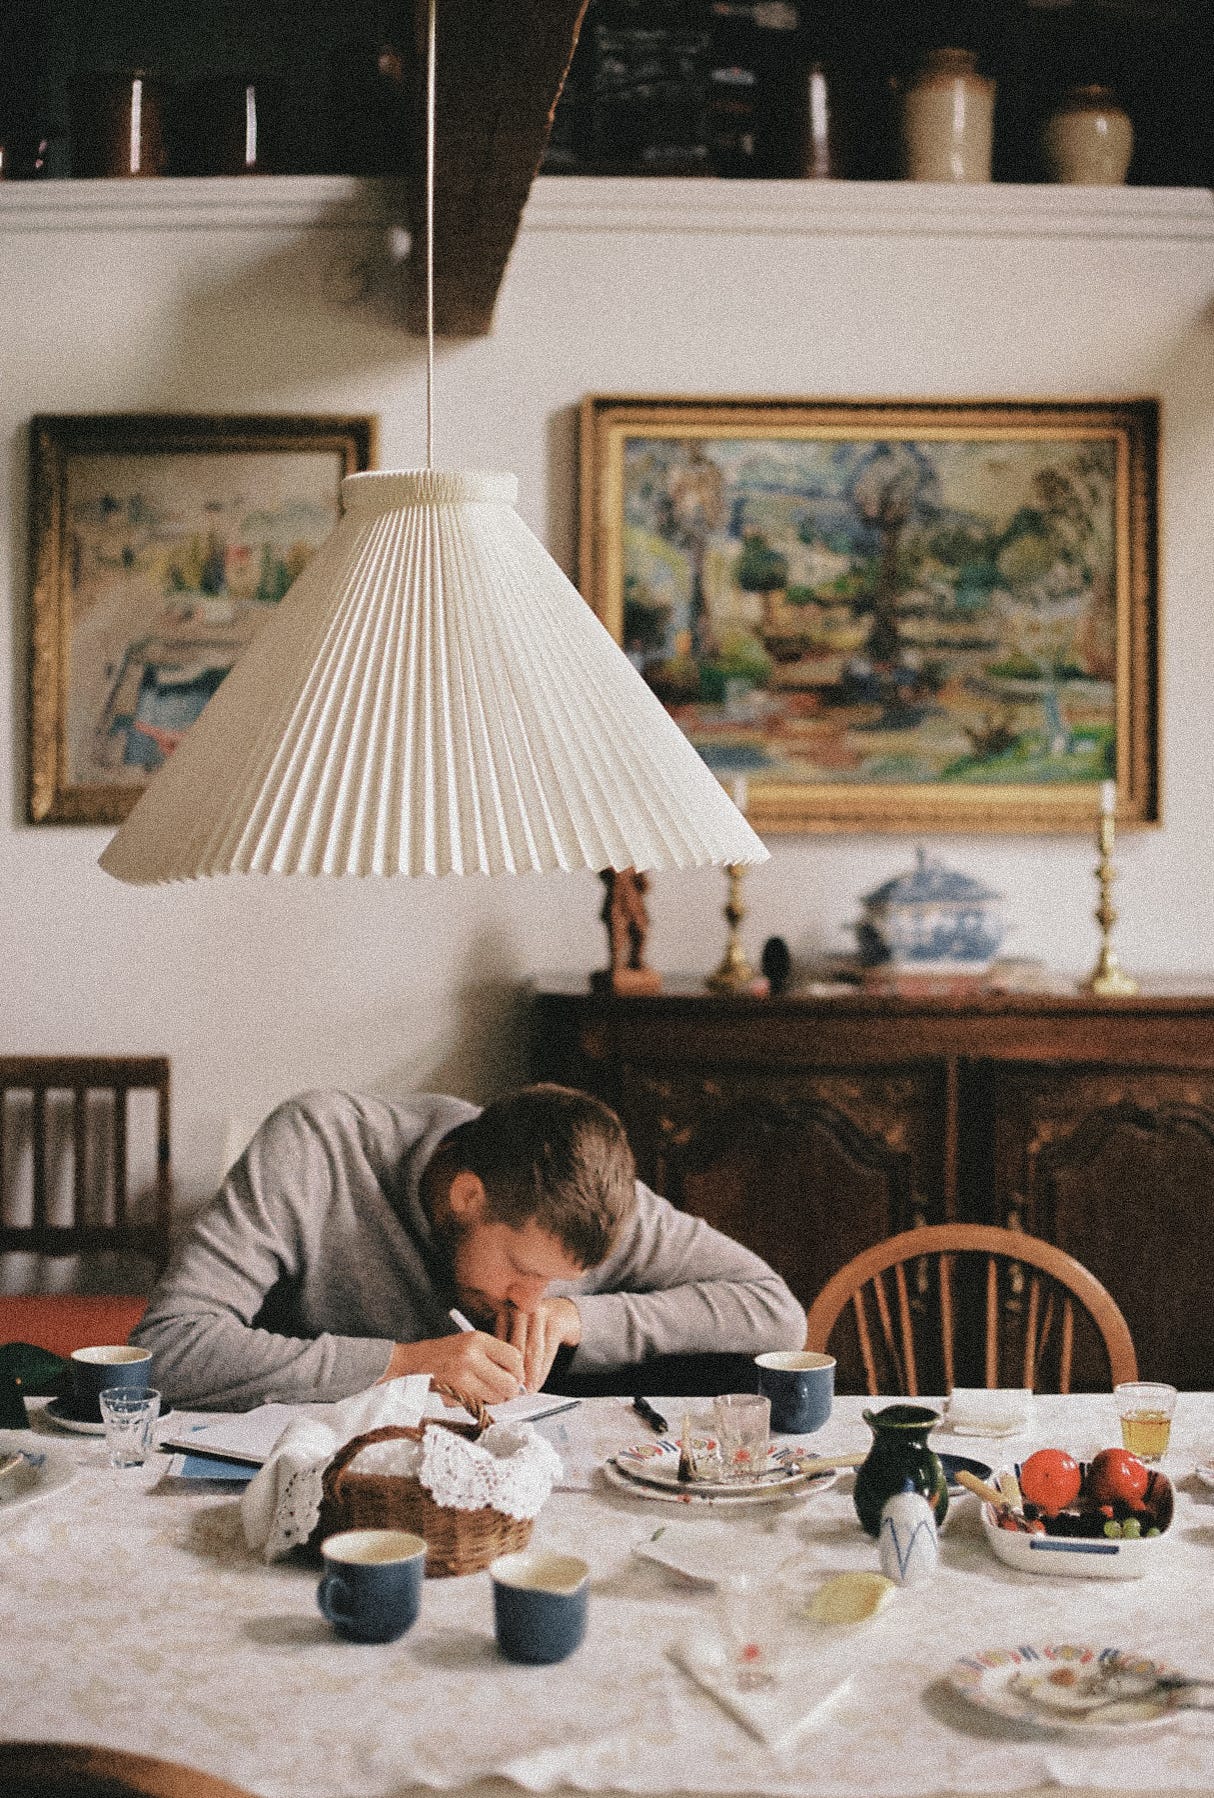 A photo of me writing a note, sitting in an old-fashioned B&B in Stevns Klint, Denmark. The photo is from before Uno was born and the grey sweater that I am wearing is no longer with me. However, I maintain the same haircut: short.